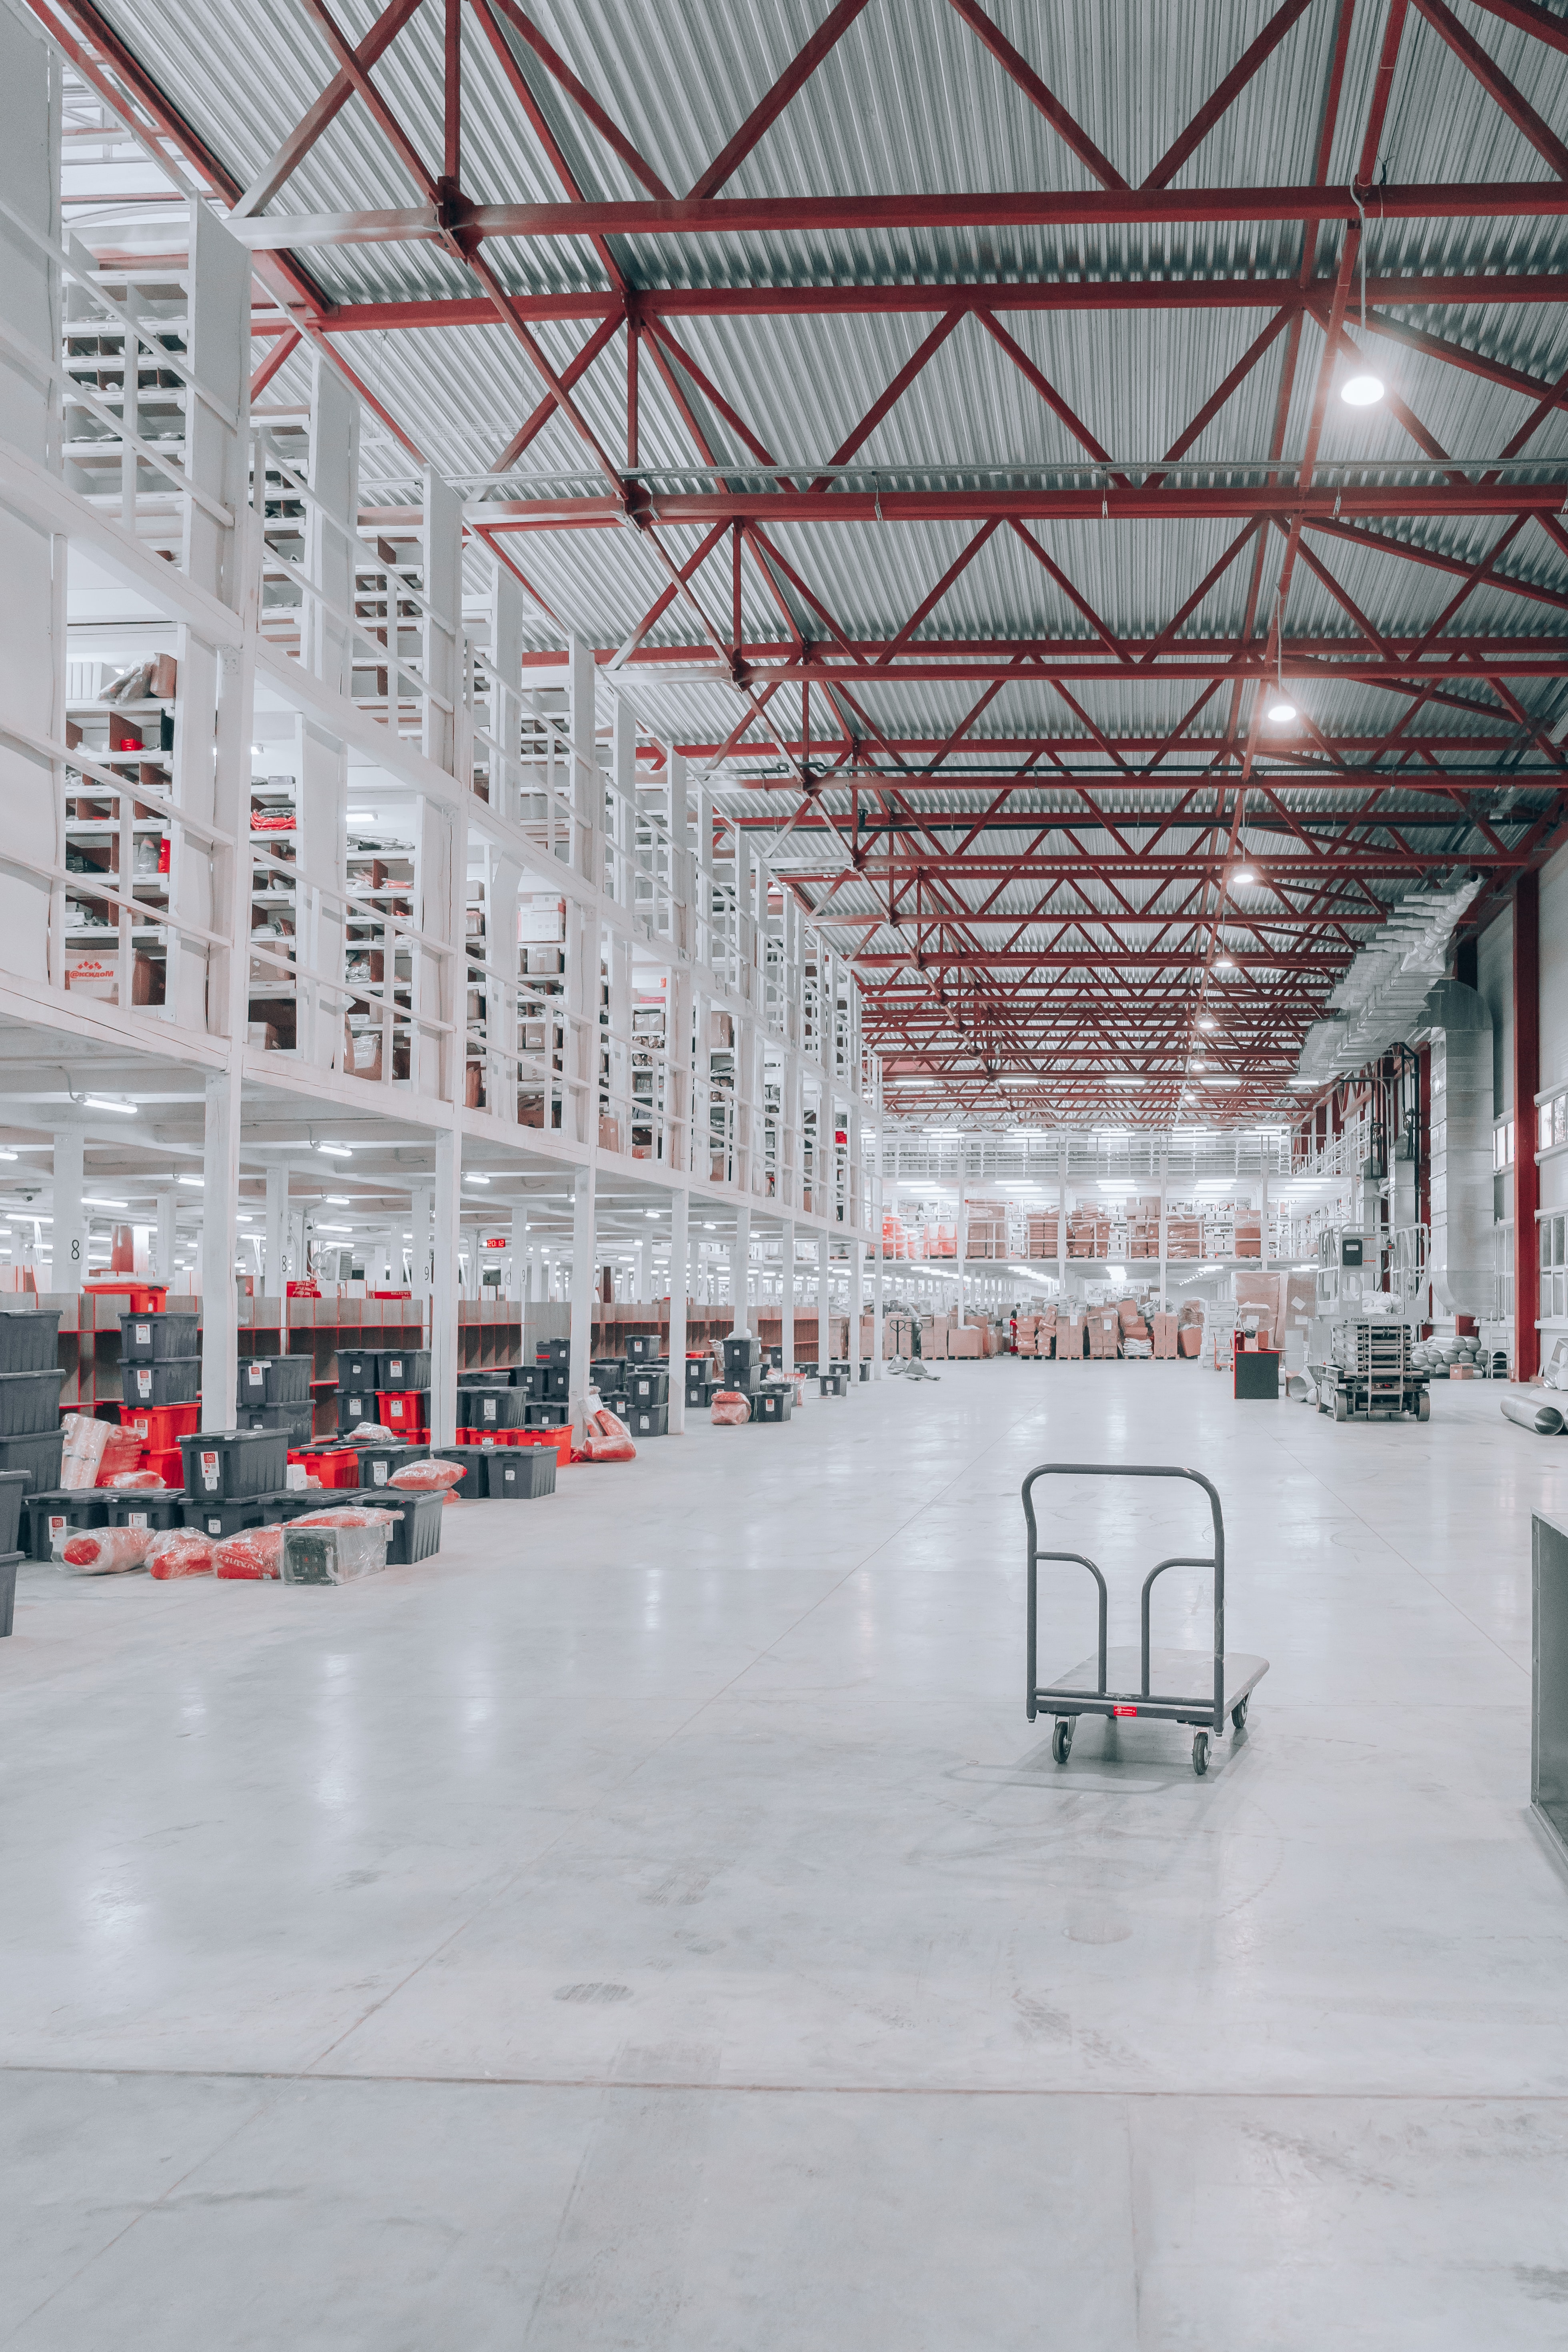 SkuNexus can help you design an eCommerce warehouse for maximum efficiency and productivity.